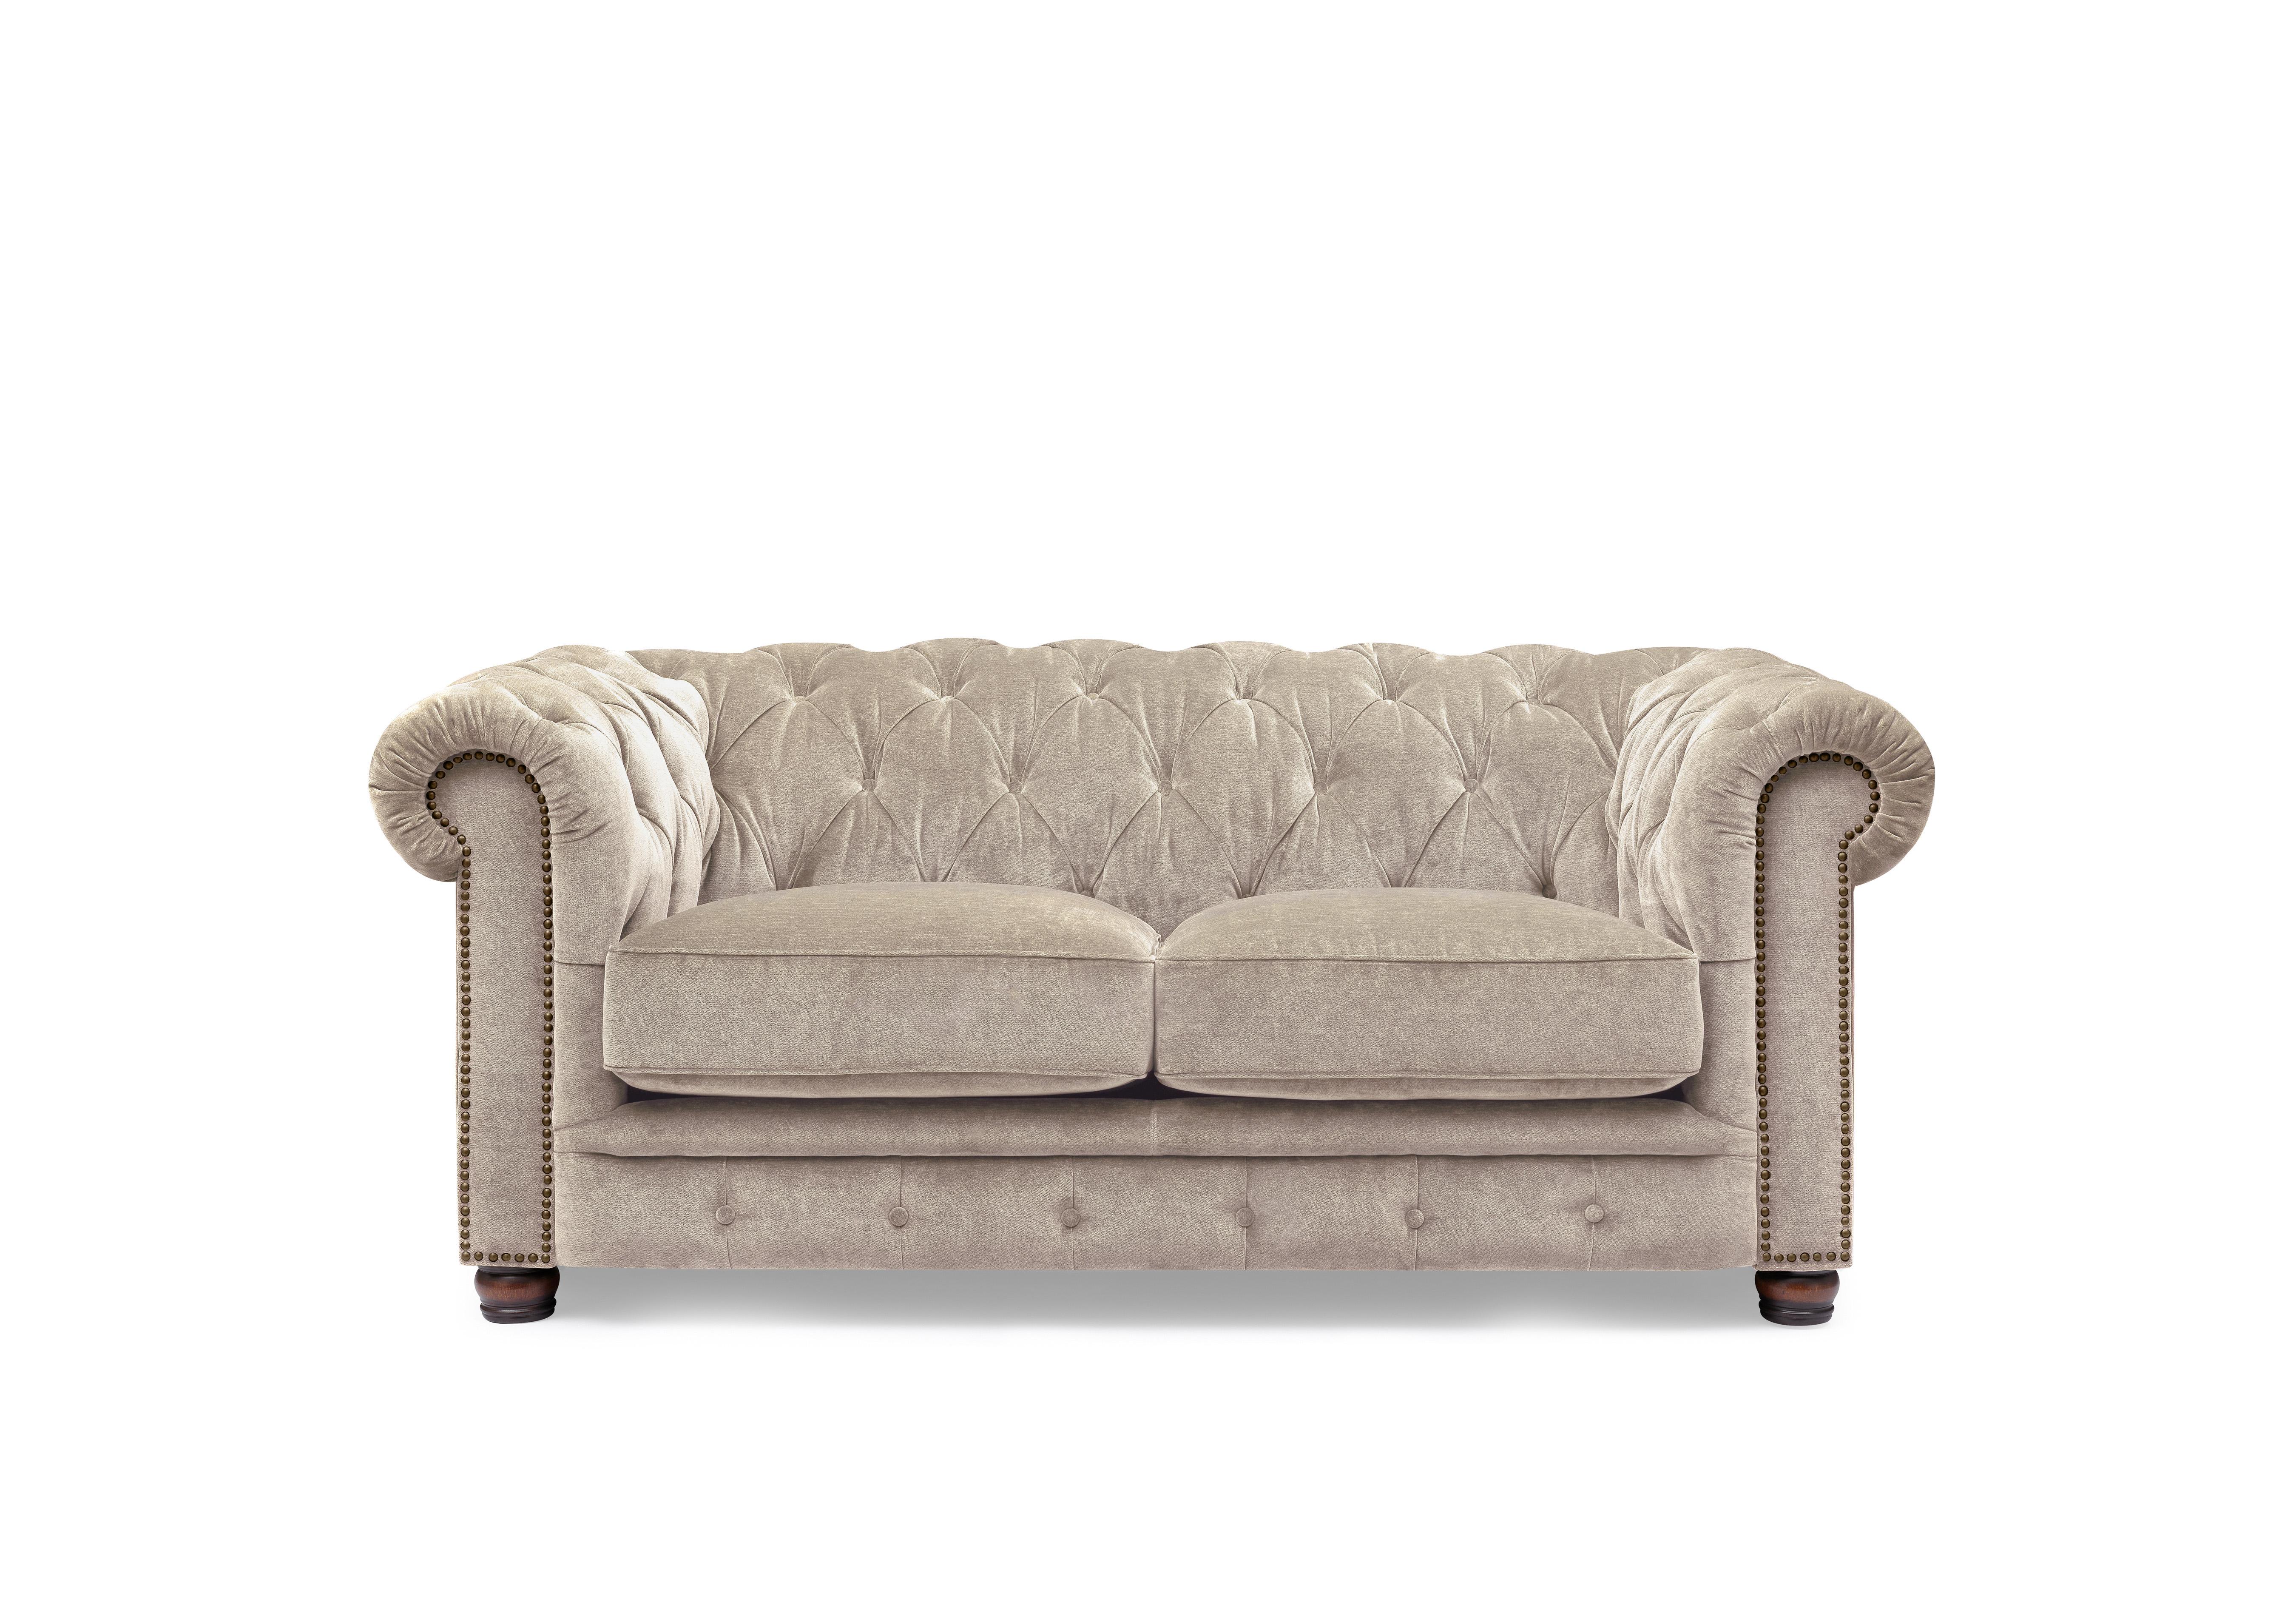 Shackleton 2 Seater Fabric Chesterfield Sofa with USB-C in X3y1-W022 Barley on Furniture Village